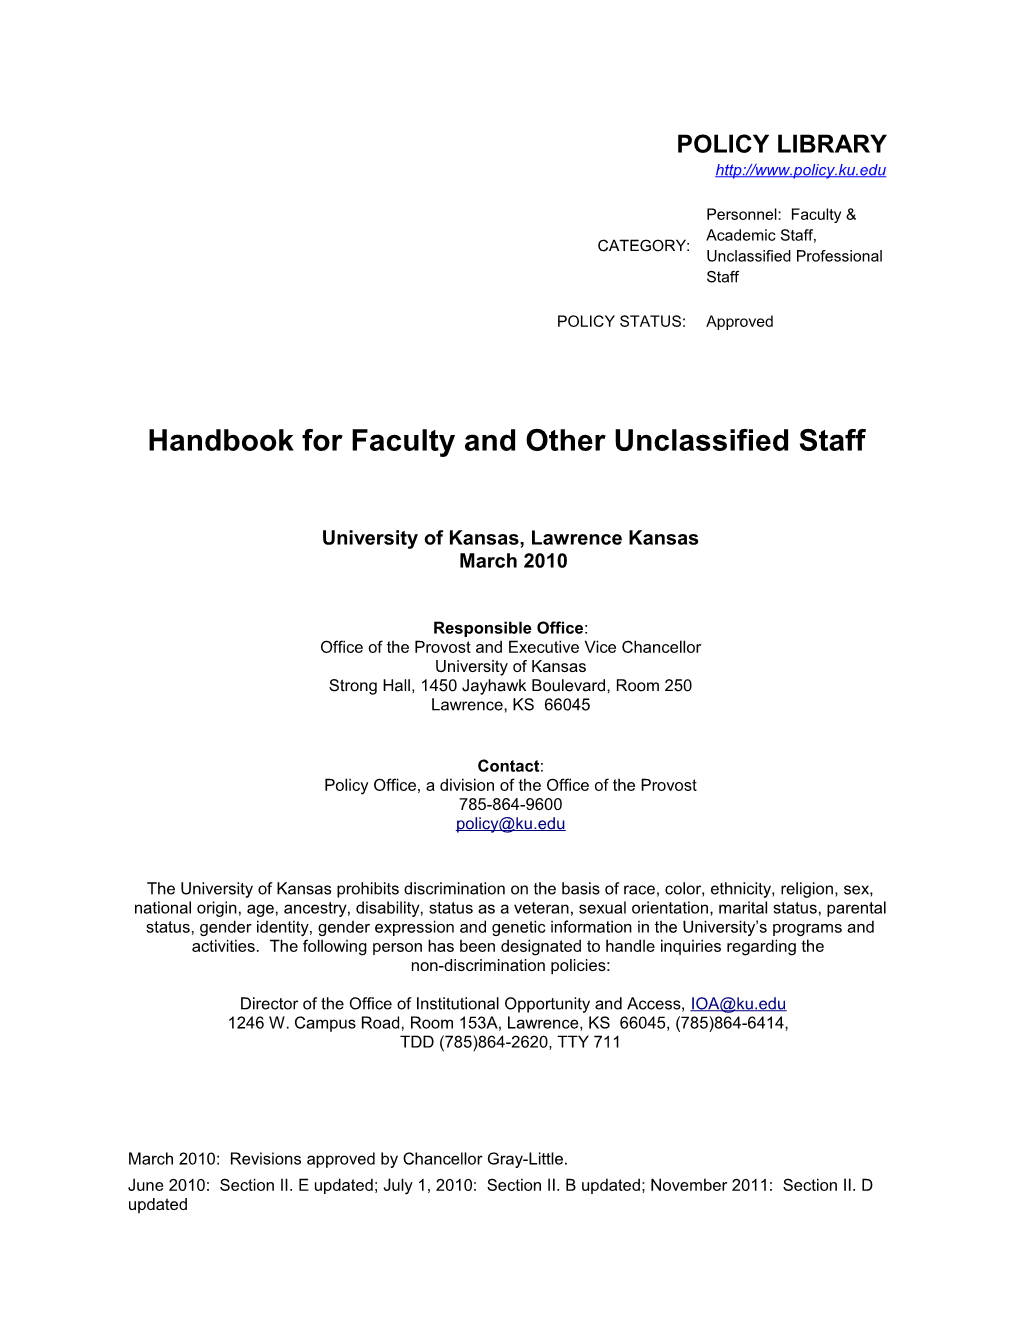 KU Policy Handbook for Faculty and Other Unclassified Staff